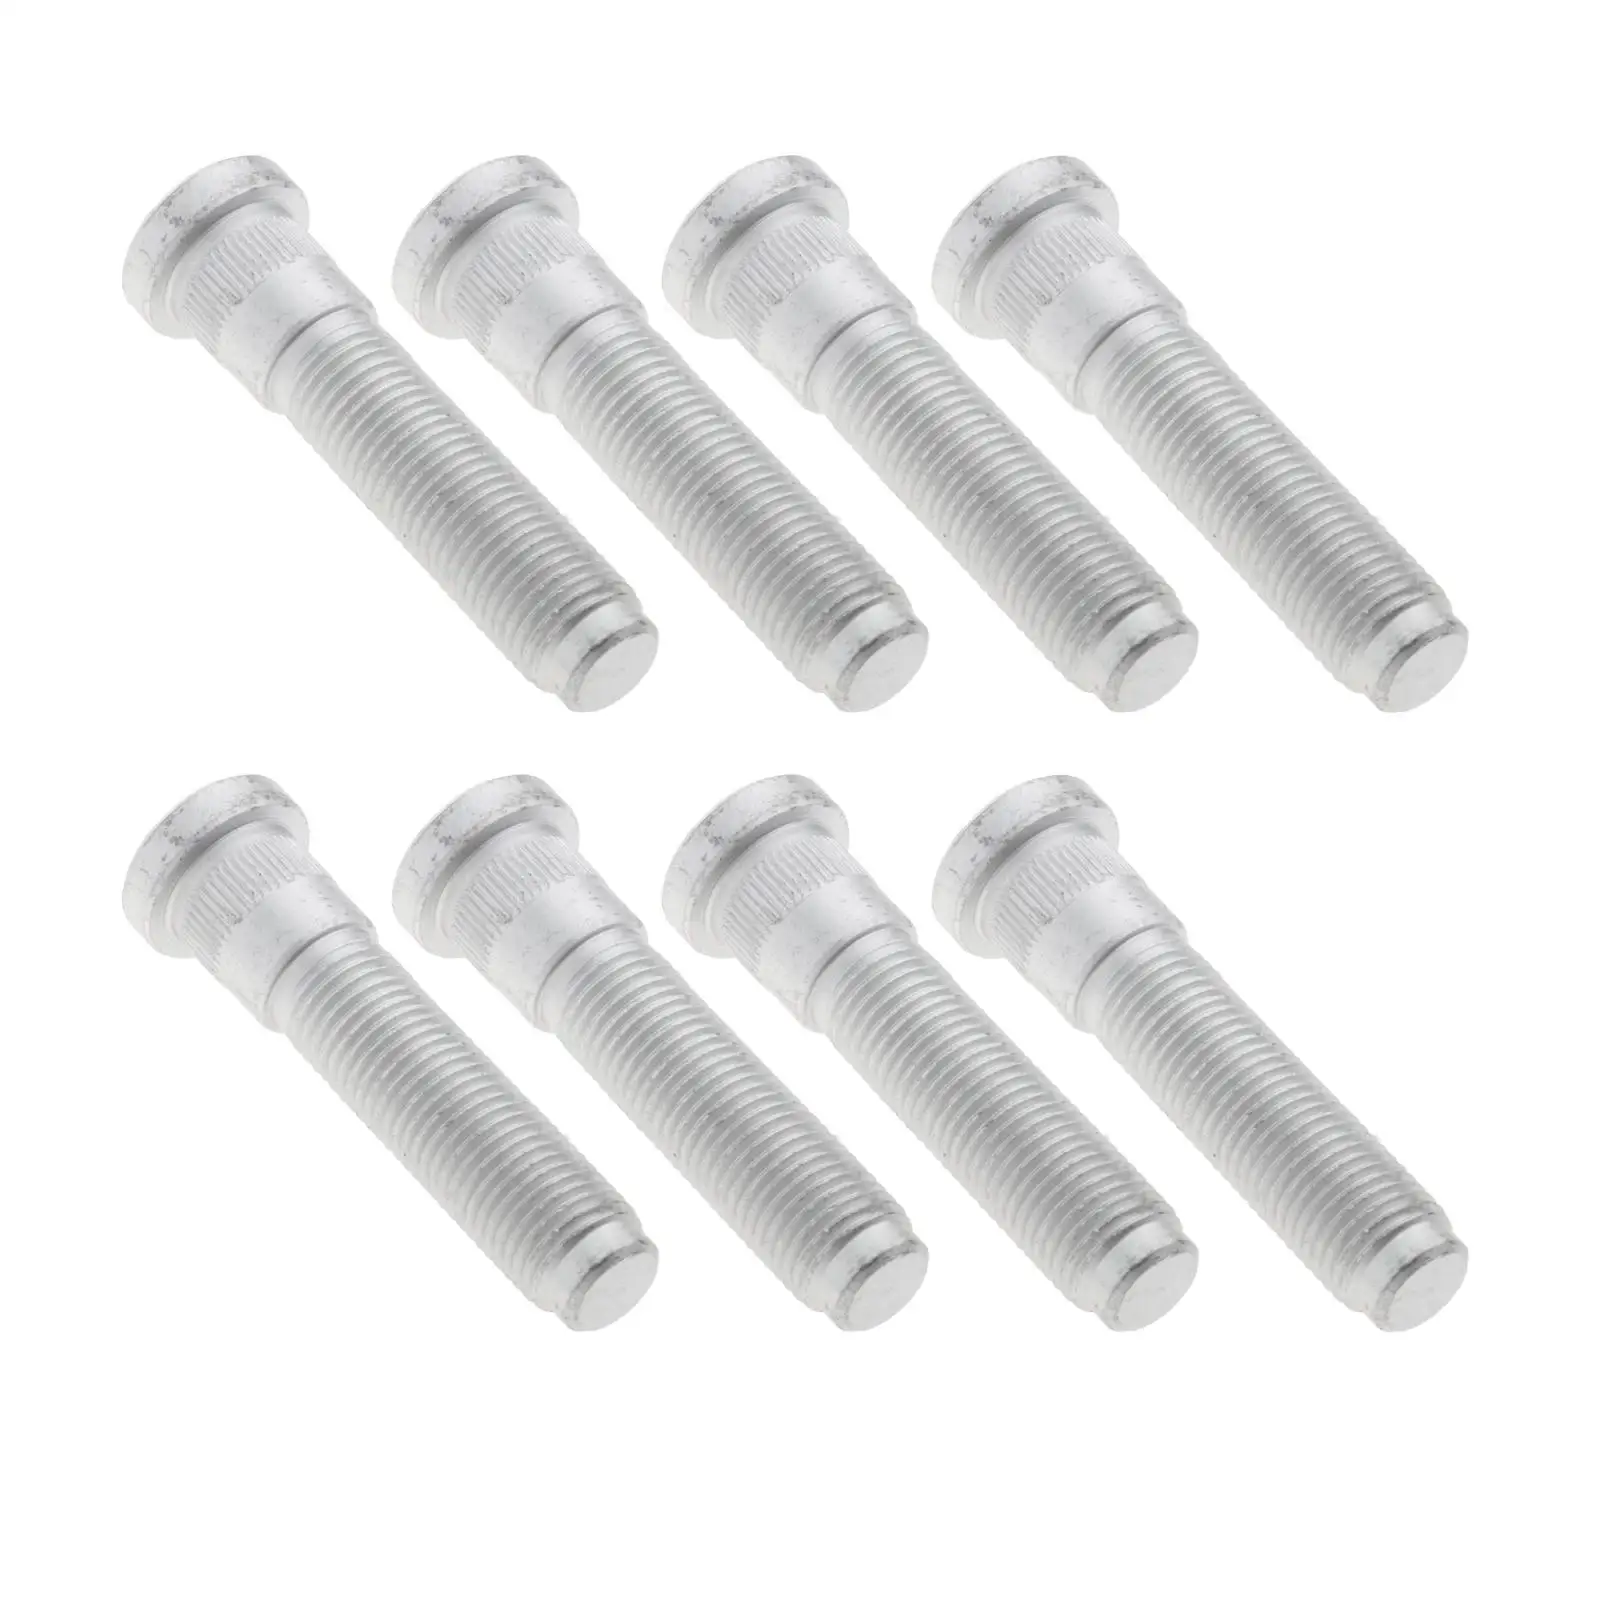 8 Pieces Front Or Rear Wheel Stud Extended  for  Ram 2500 3500 6509866AA, ,Easy to Install